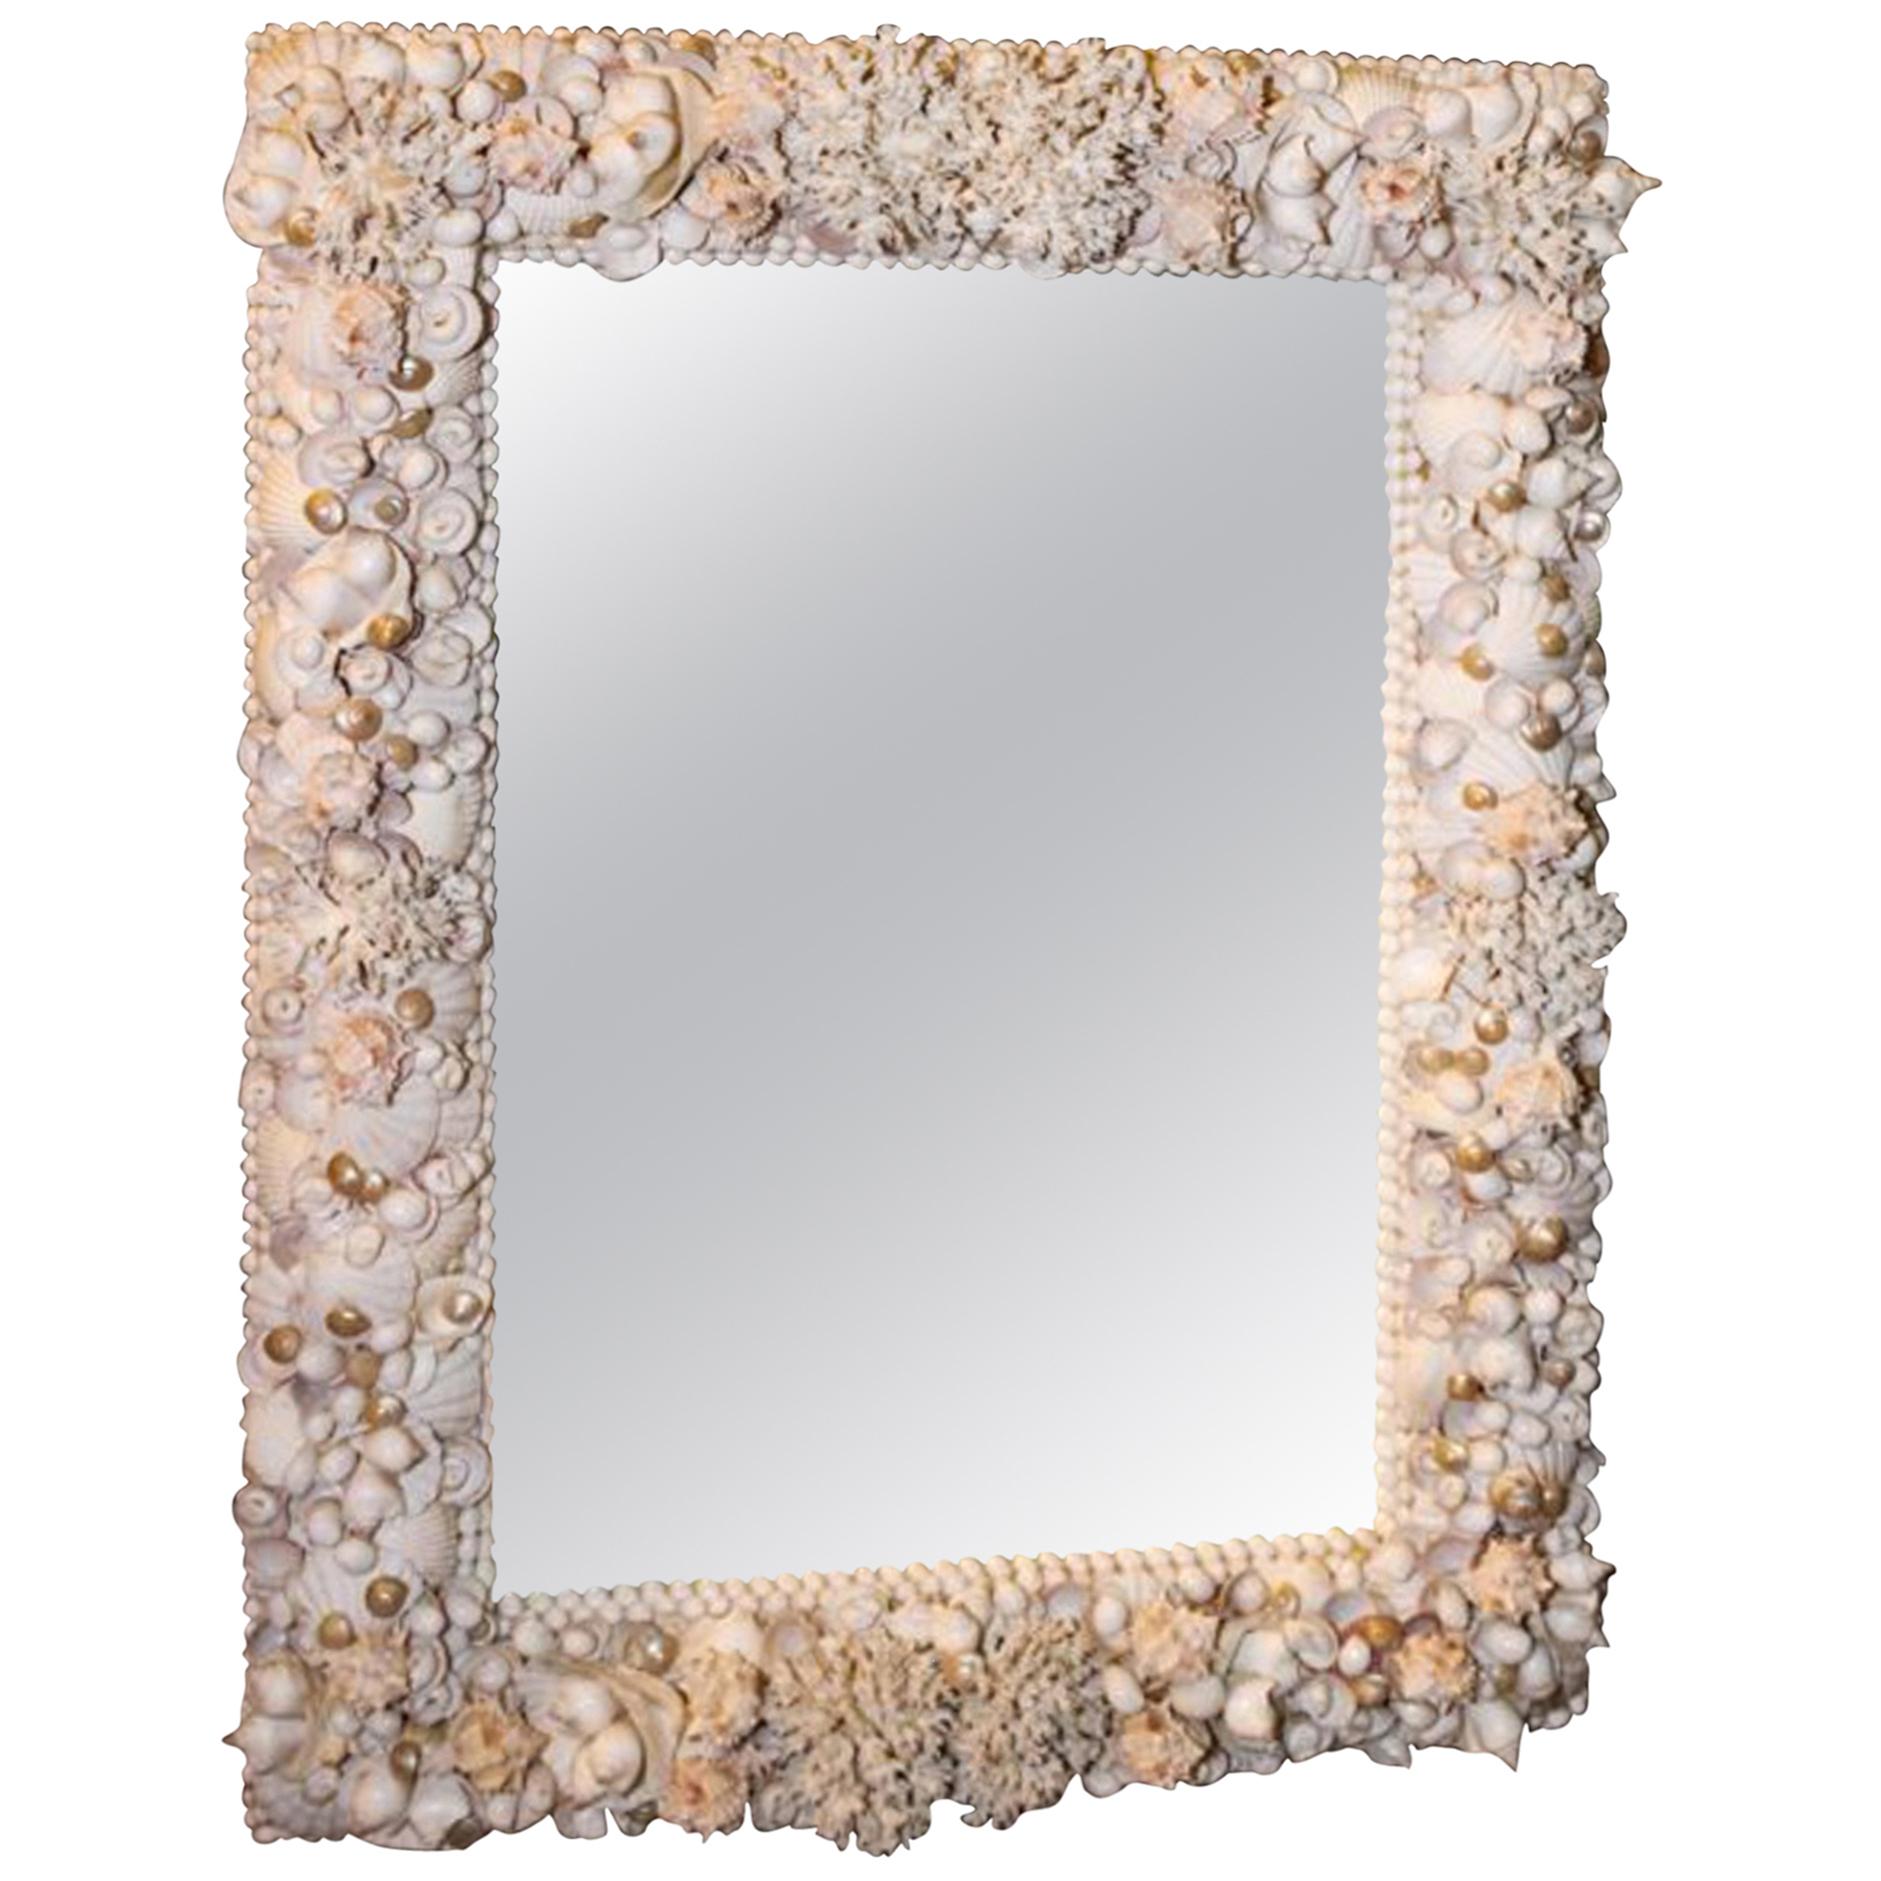 Grotto Style Shell Decorated Mirror 40" x 30" Great Composition, Detail & Depth